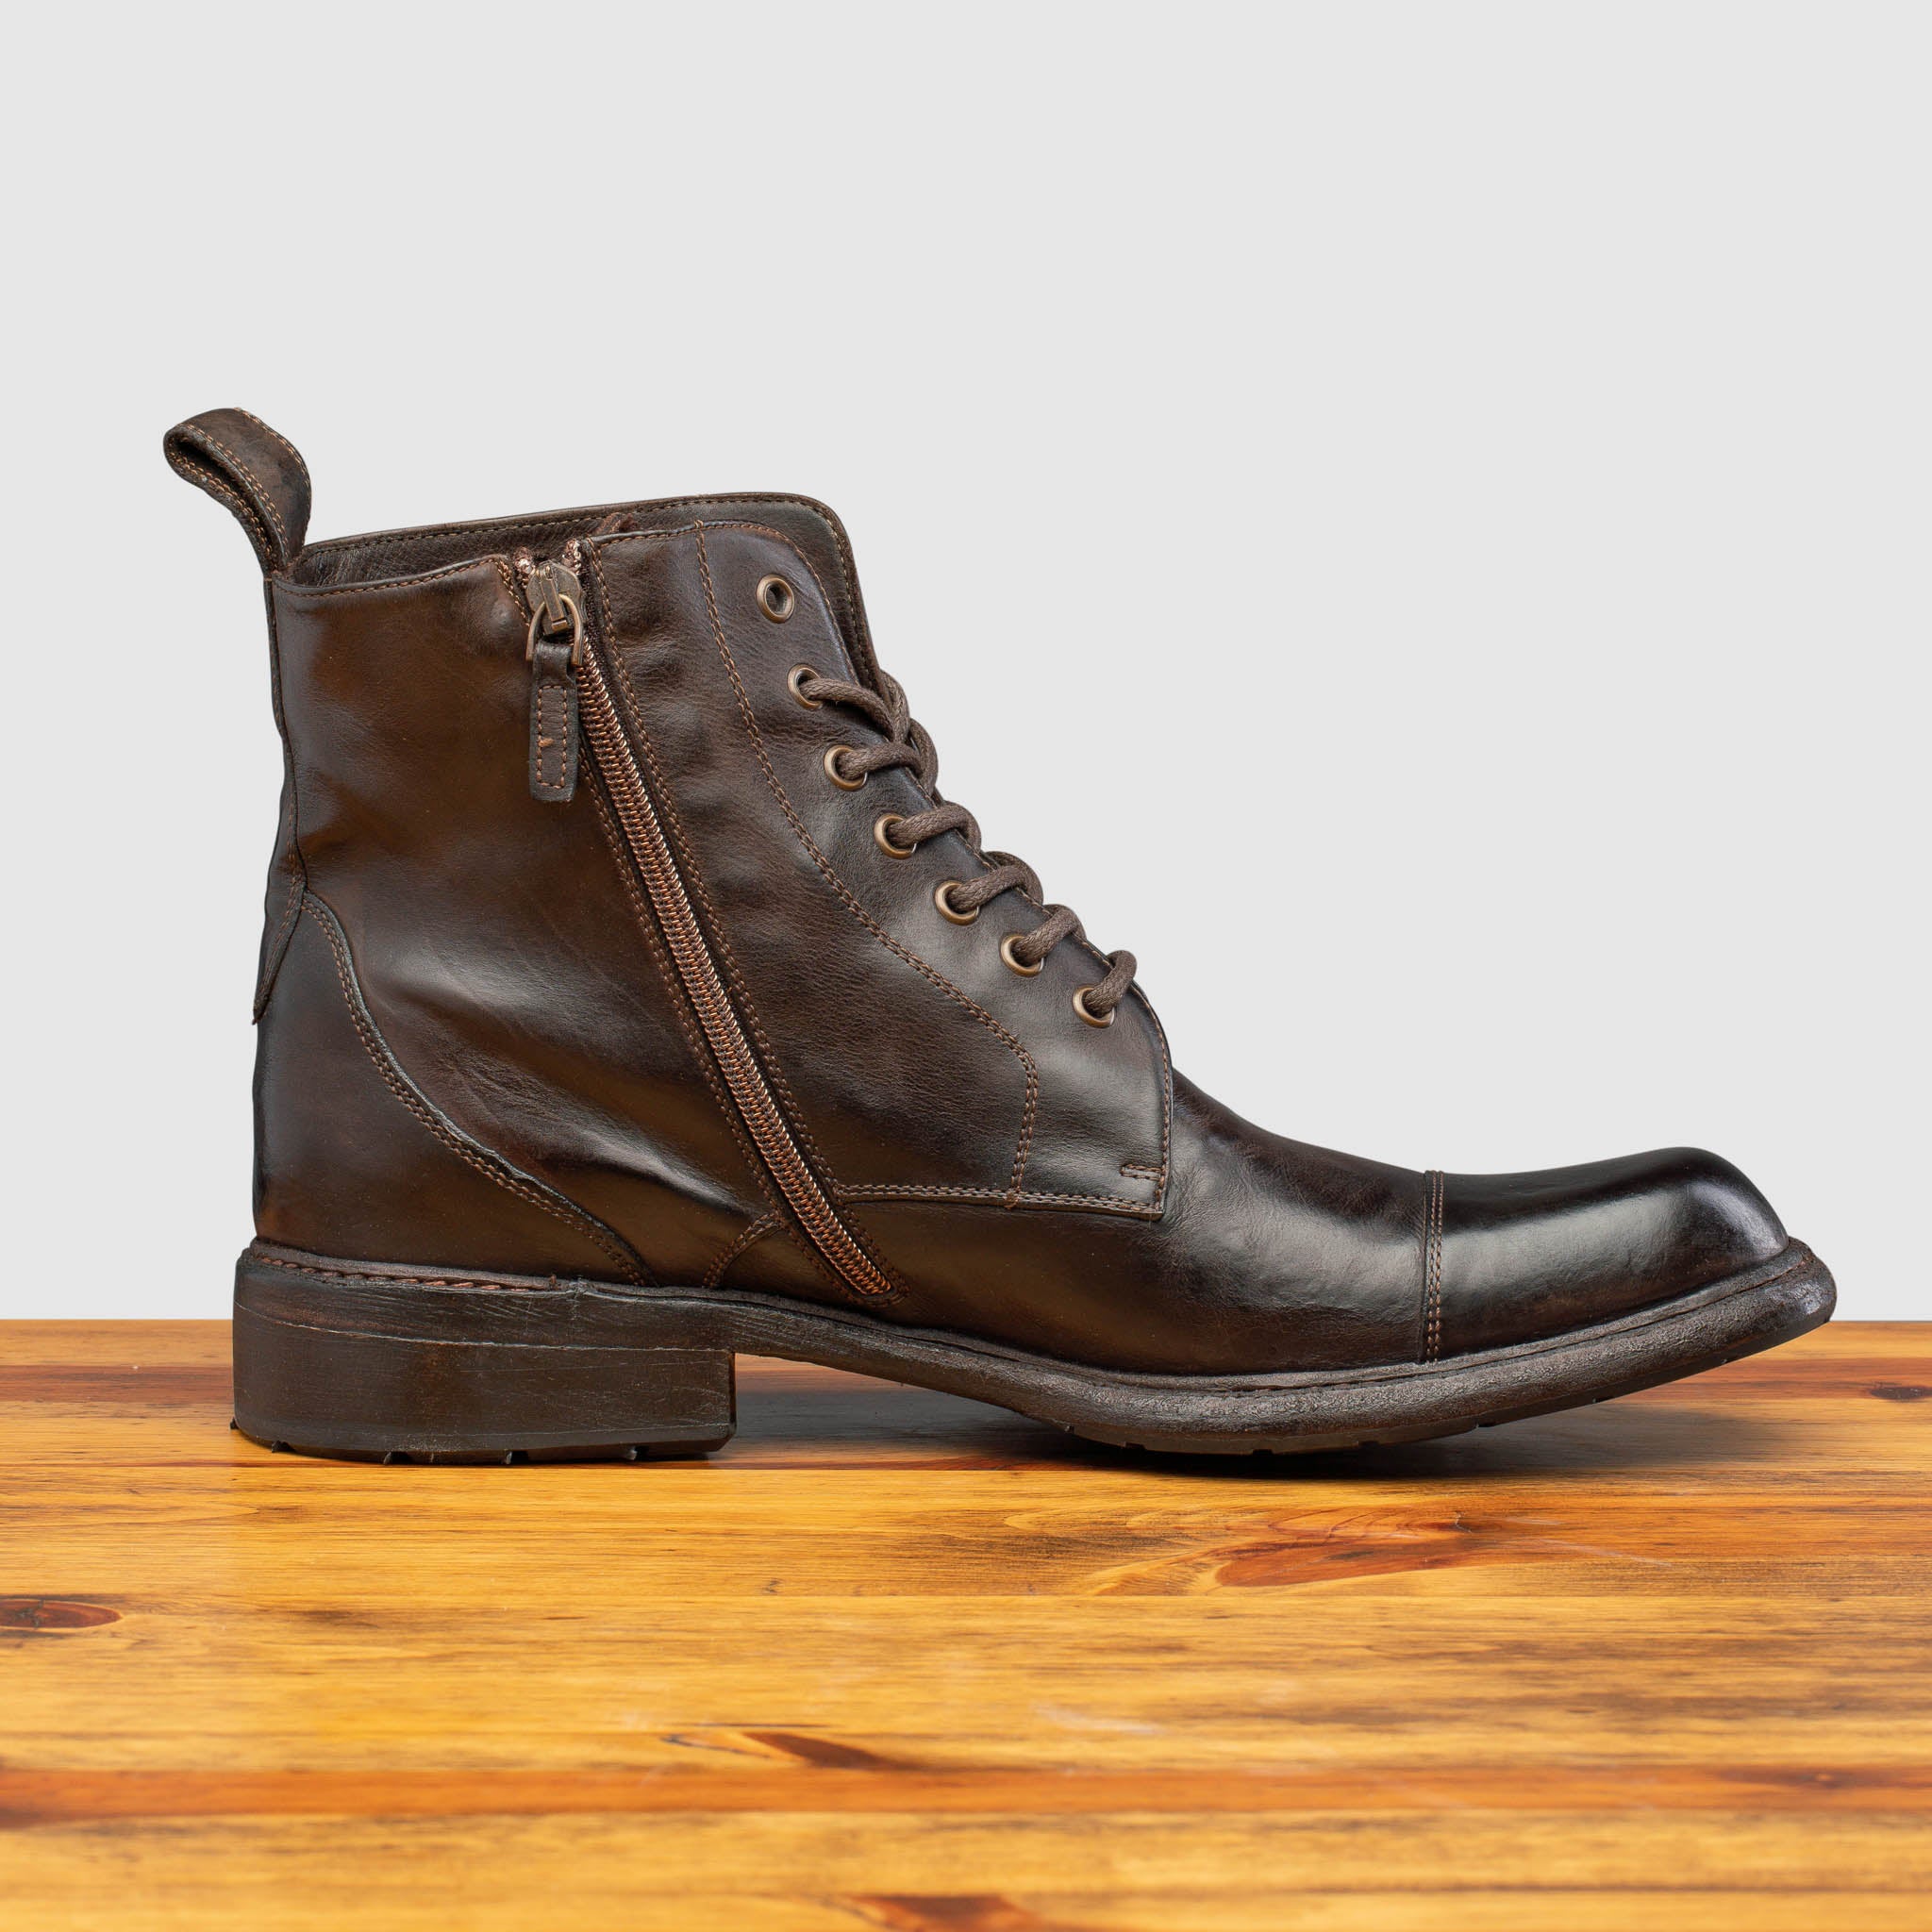 Side profile of Q549 Calzoleria Toscana Dark Brown Combat Boot on top of a wooden table